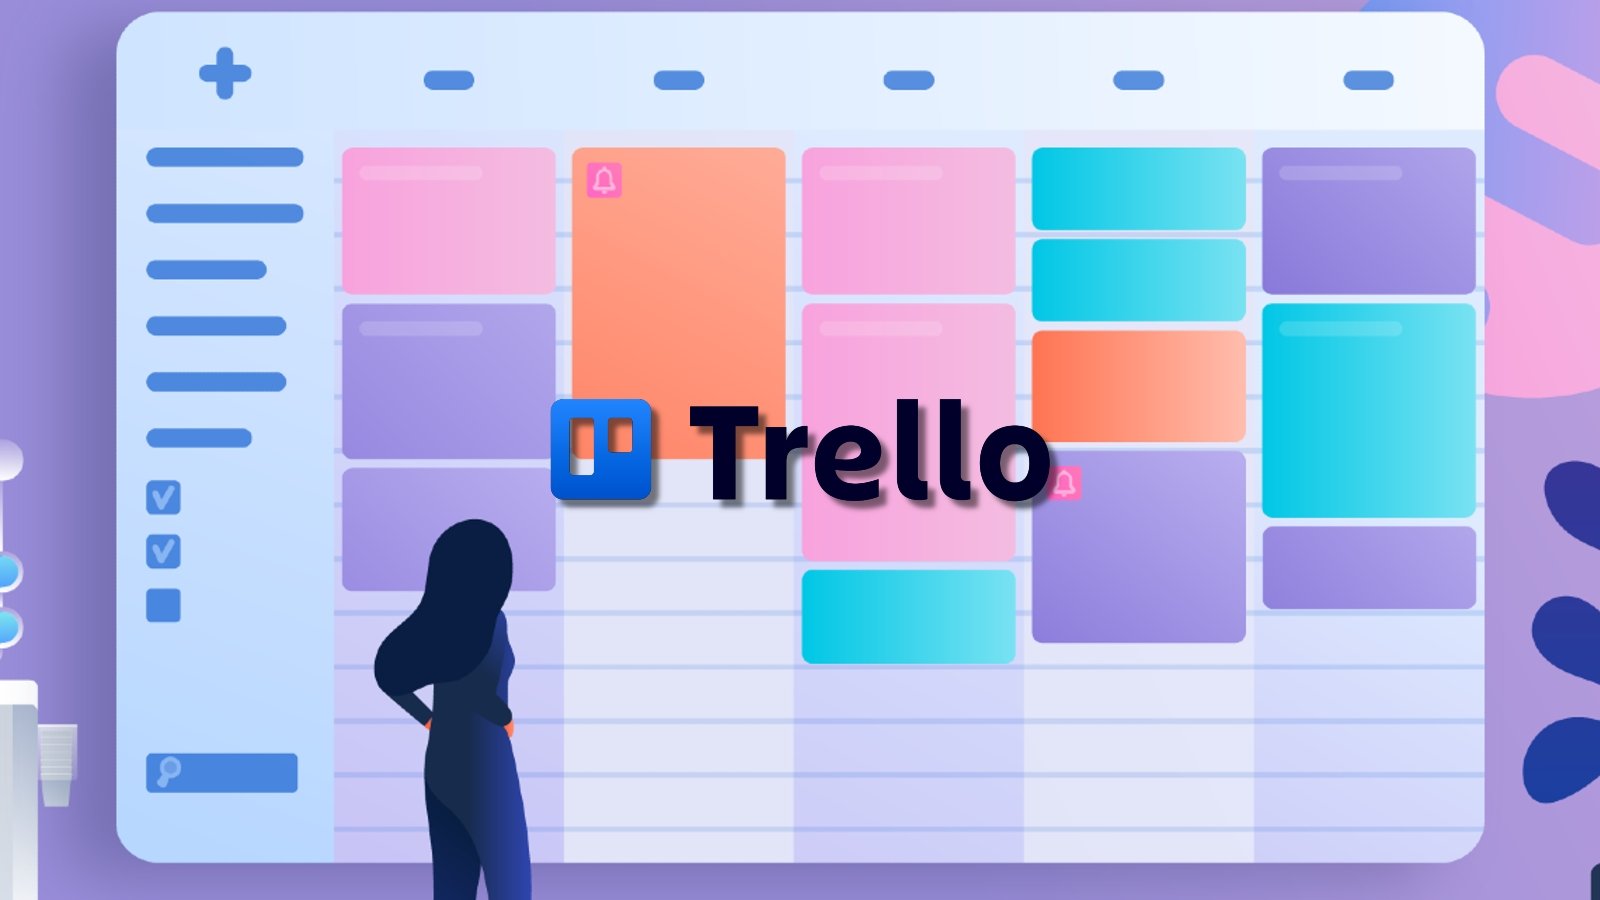 The Trello API was abused to link email addresses to 15 million accounts